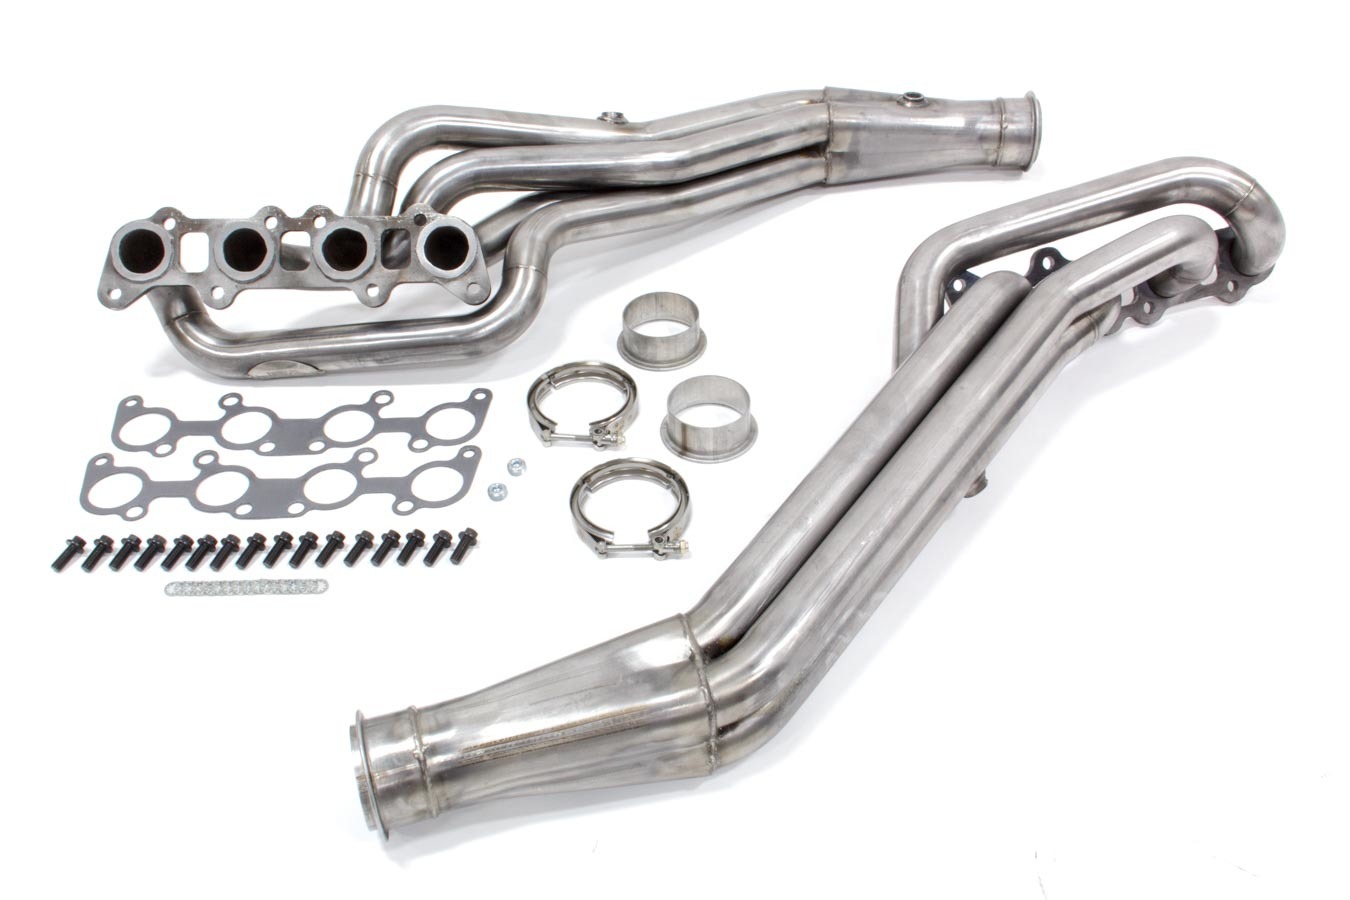 JBA Exhaust 6689S Headers, Long Tube, 1-7/8 in Primary, 3 in Collector, Stainless, Natural, Ford Coyote, Ford Mustang 2015-16, Pair